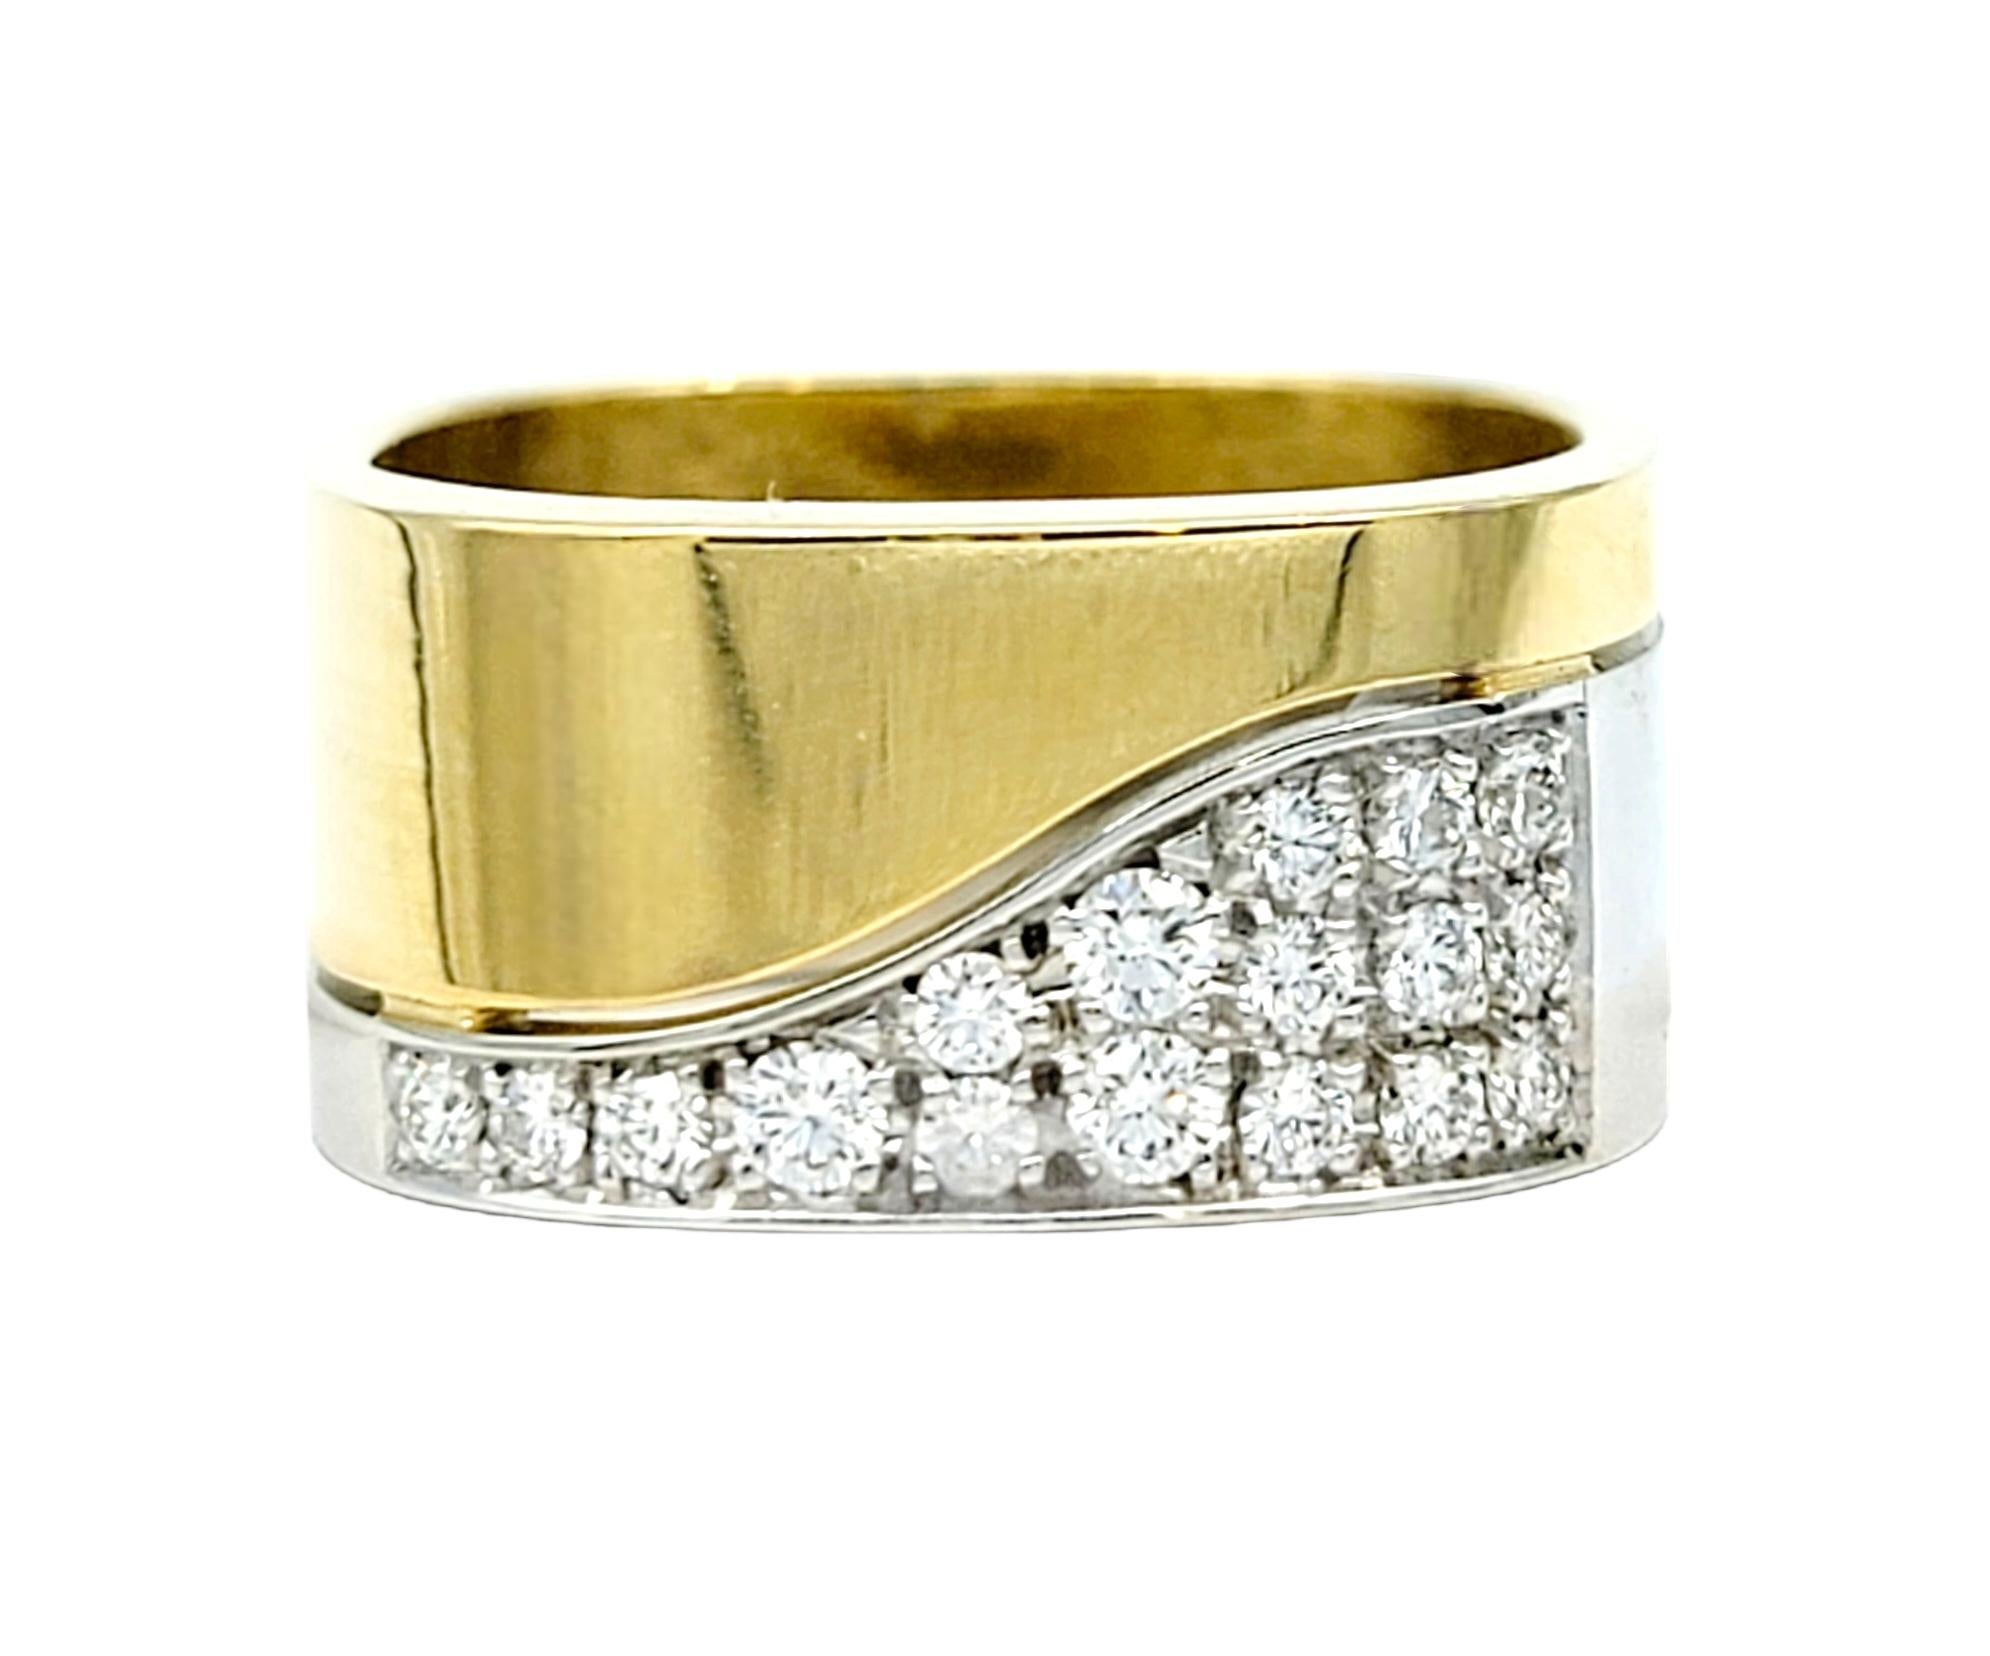 Ring size: 5.75

Discover the epitome of luxury and innovation with the Jean-Francois Albert 